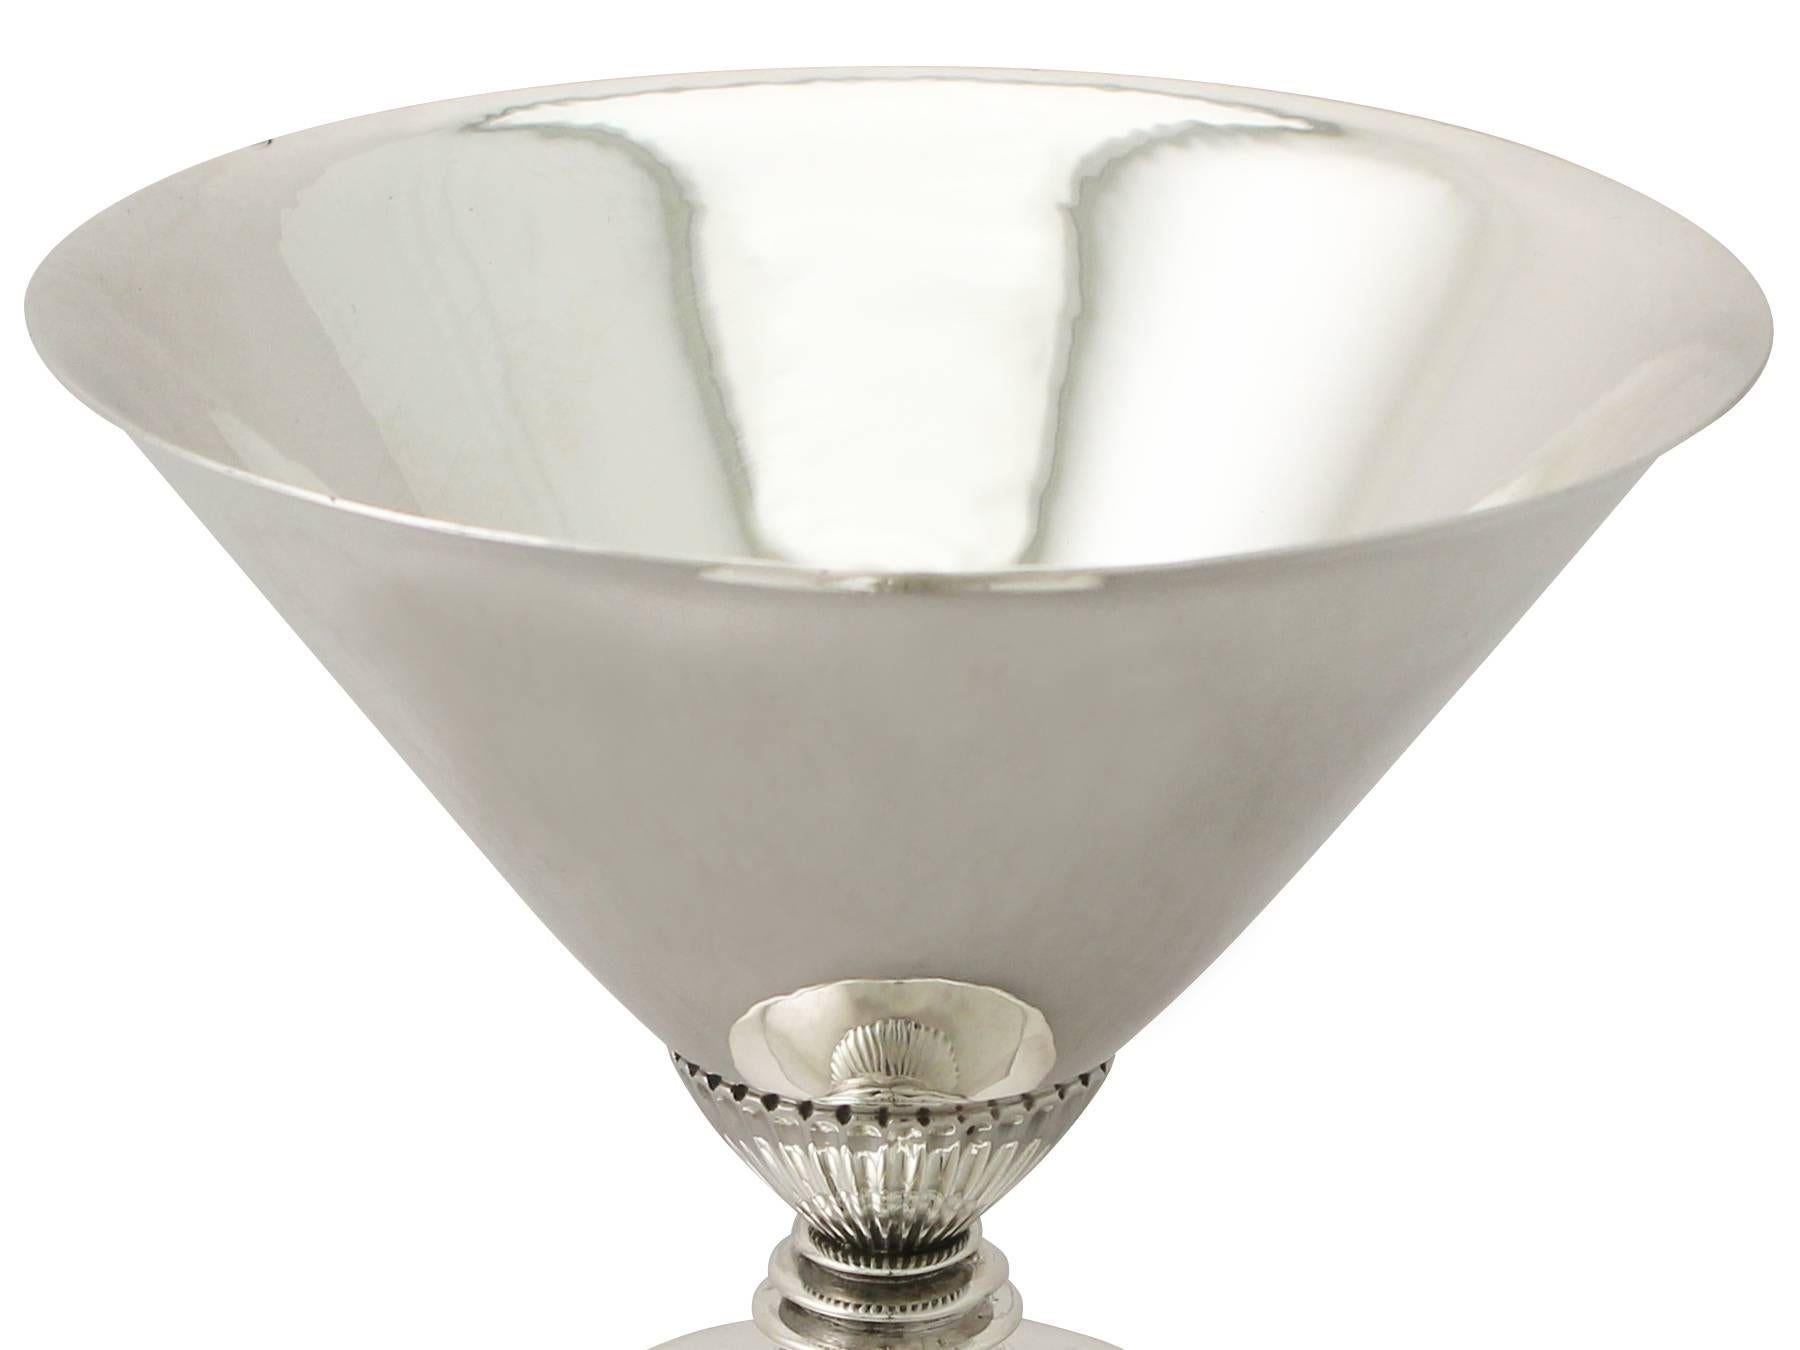 Mid-20th Century Arts and Crafts Style Danish Sterling Silver Bowl by Georg Jensen